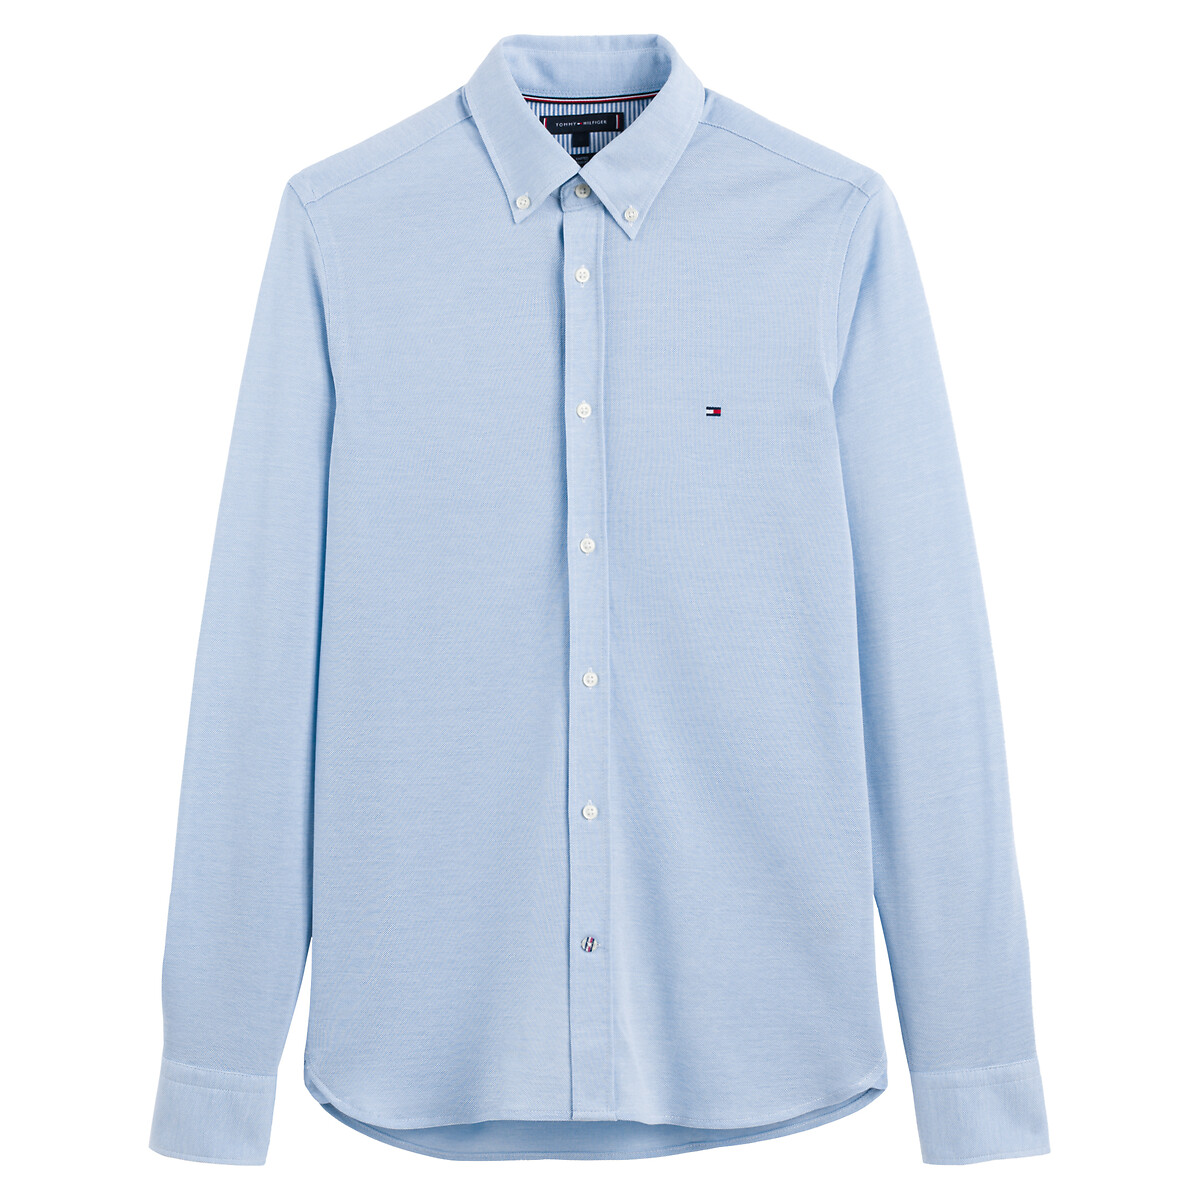 Image of 1985 Cotton Pique Shirt in Slim Fit with Buttoned Collar